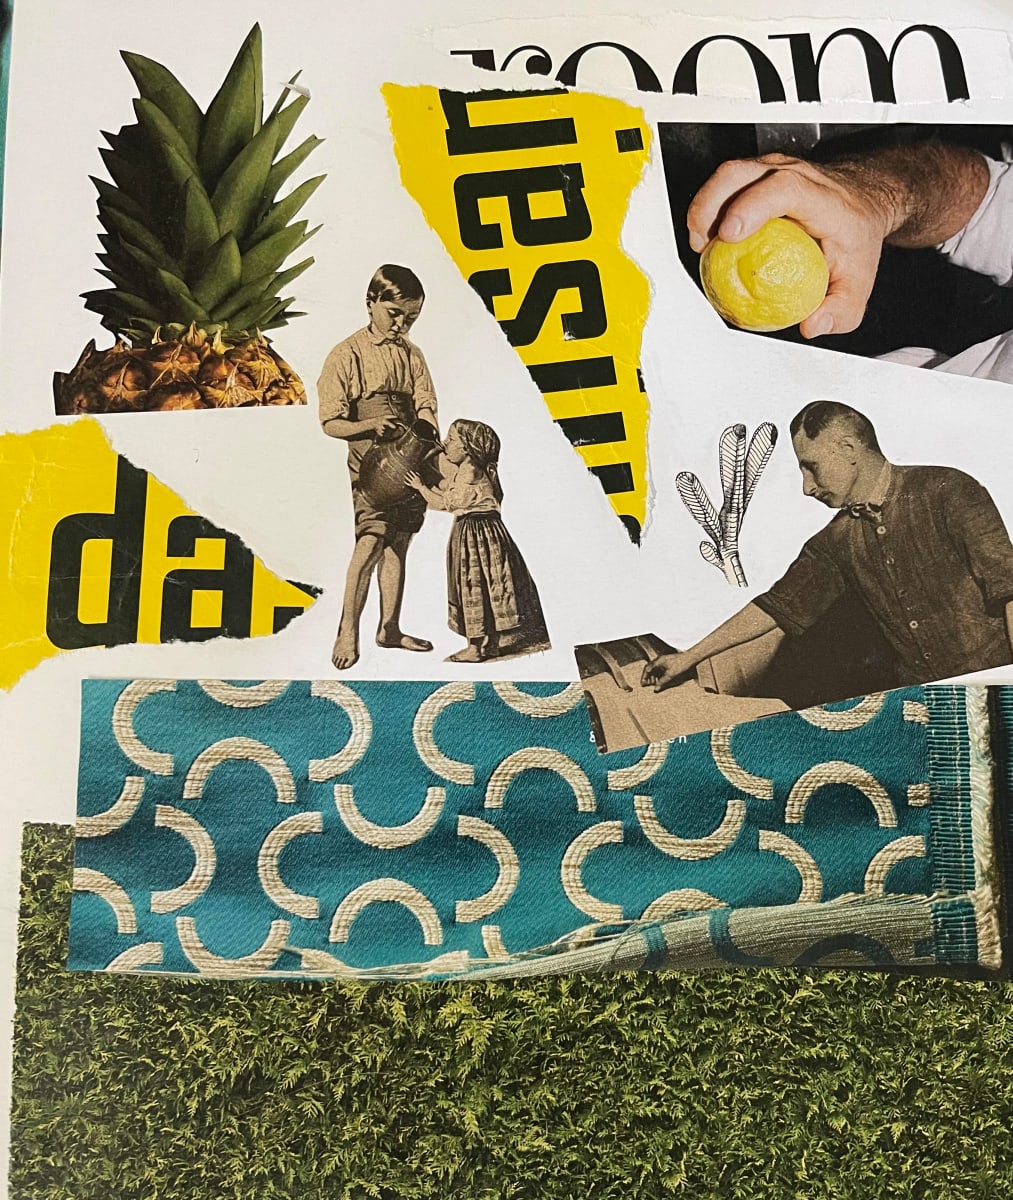 Collage from Magazine Cut-outs :: Behance